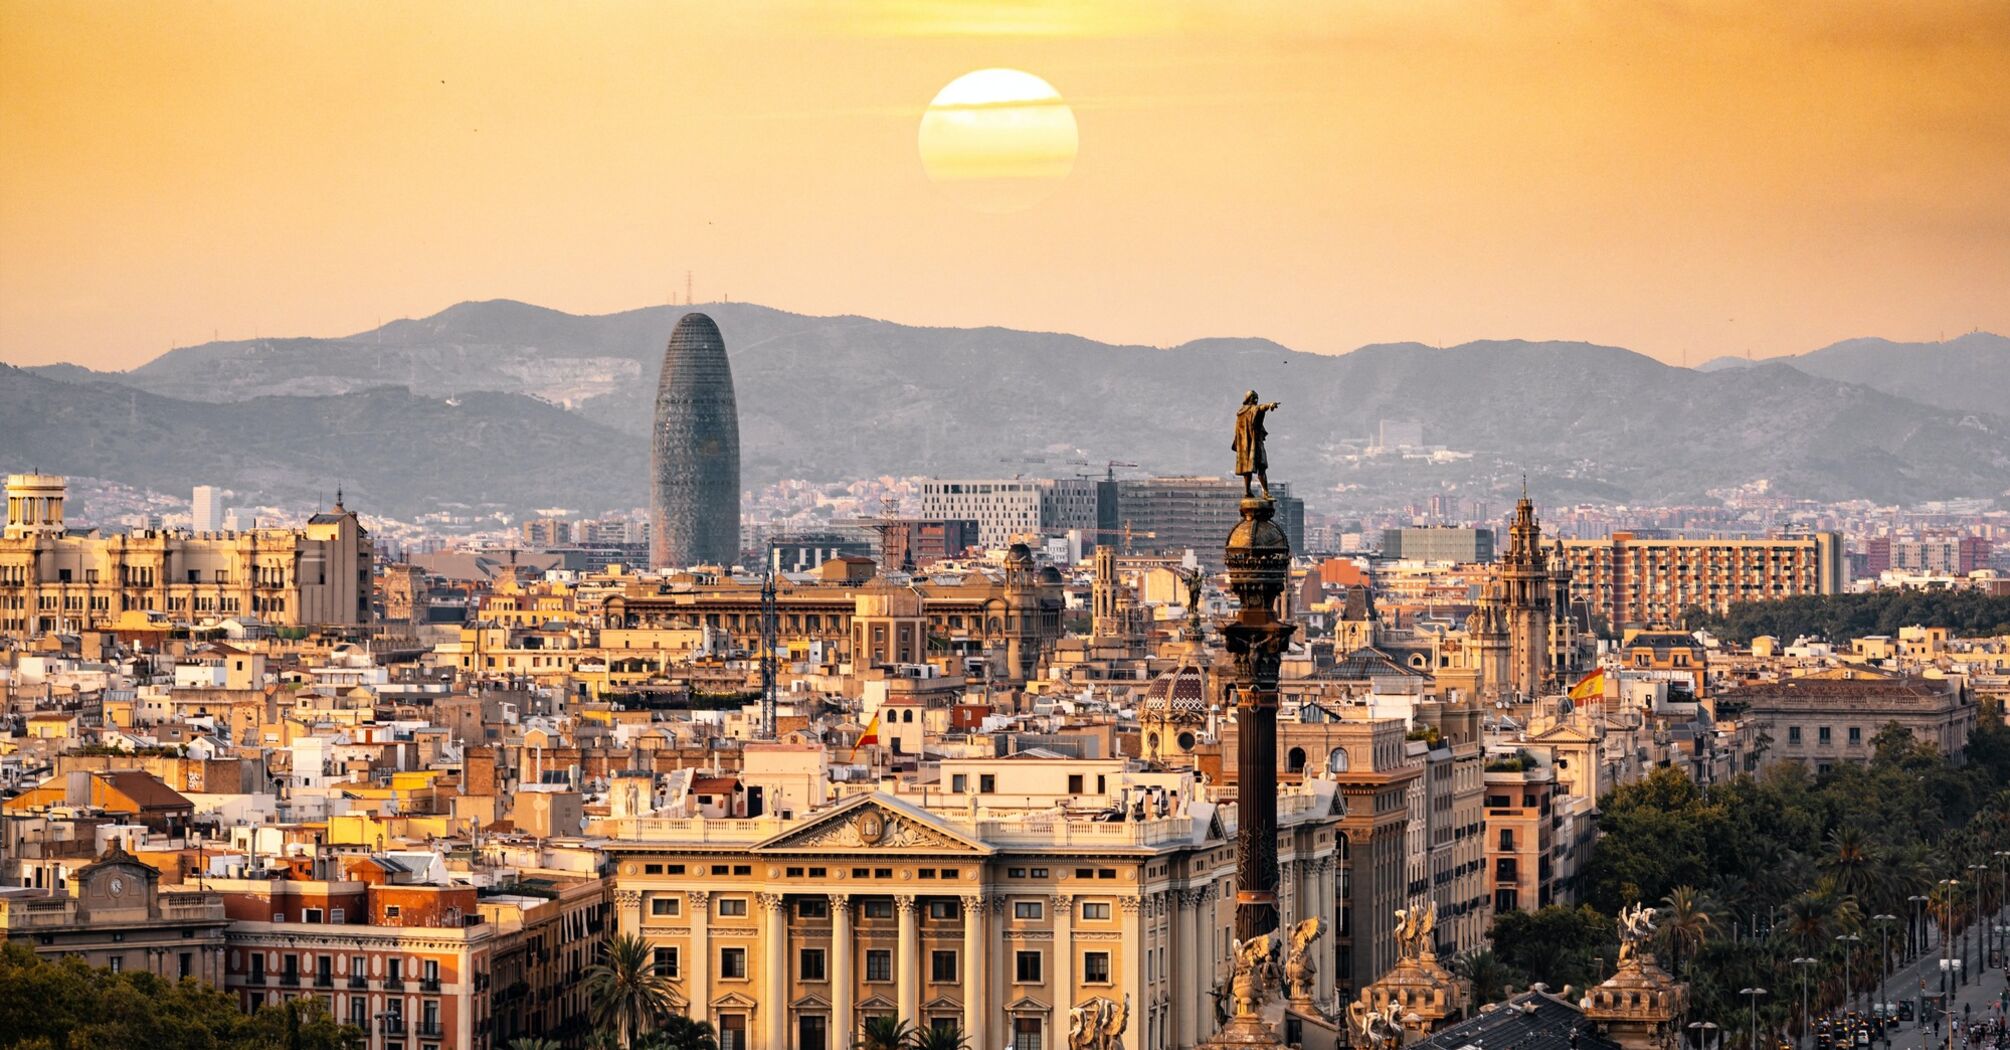 The best hotels for a stopover in Barcelona. Luxurious places with mind-blowing views of the city from above